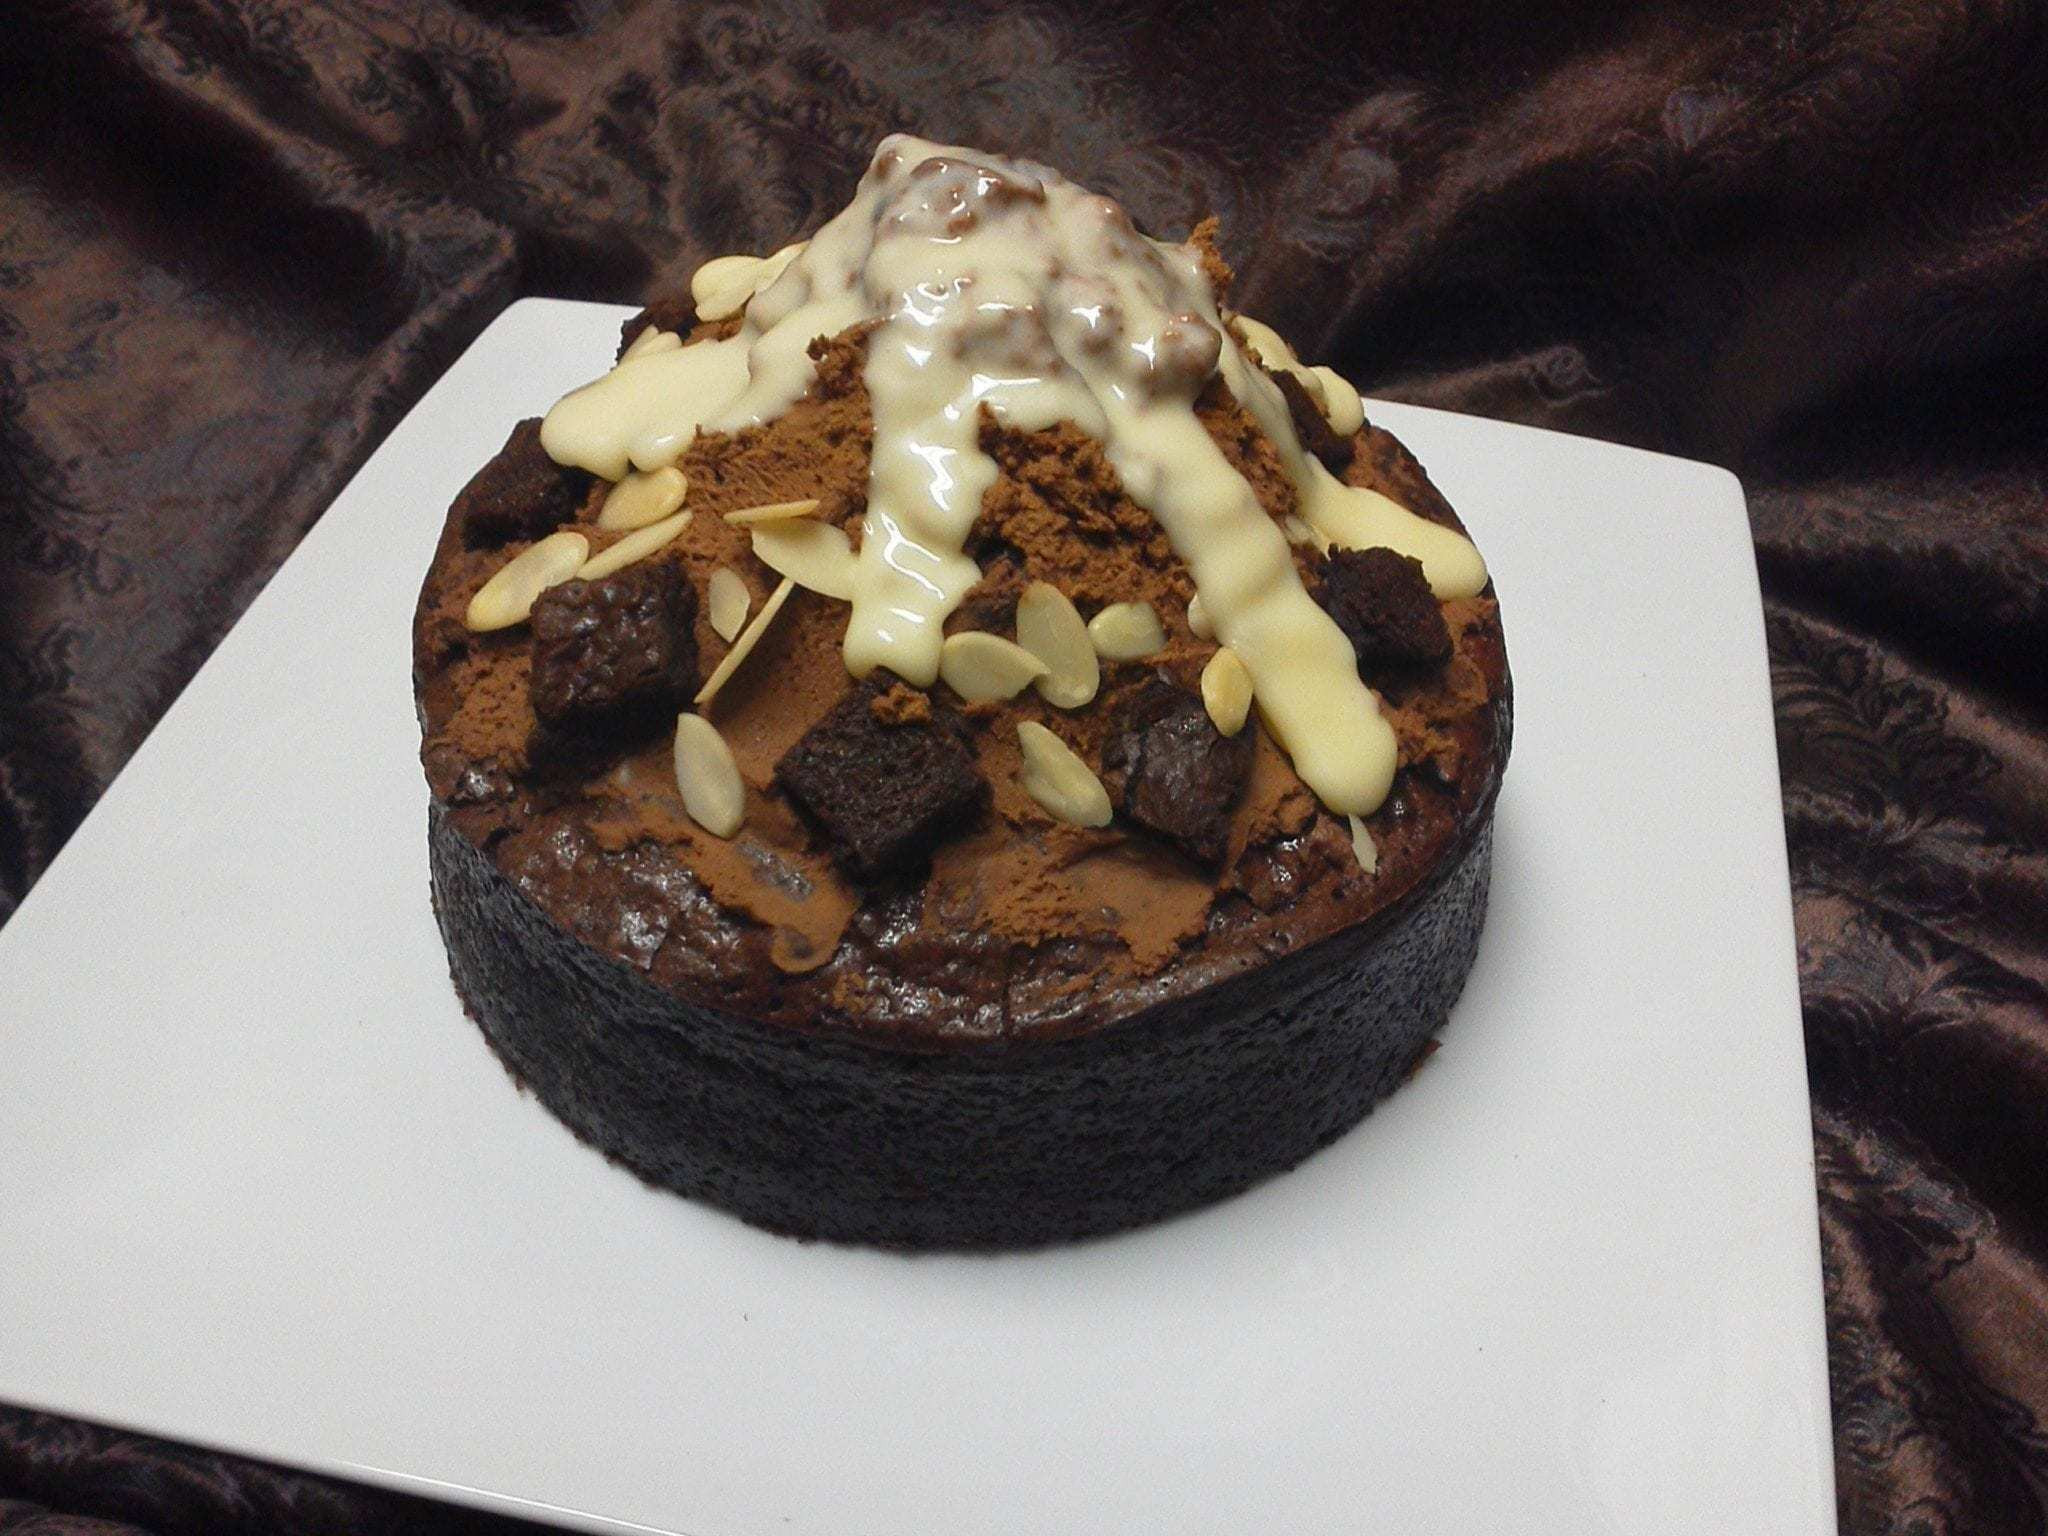 Gourmet Desserts Delivered
 CHOCOLATE MOUSSE MOUNTAIN BROWNIE